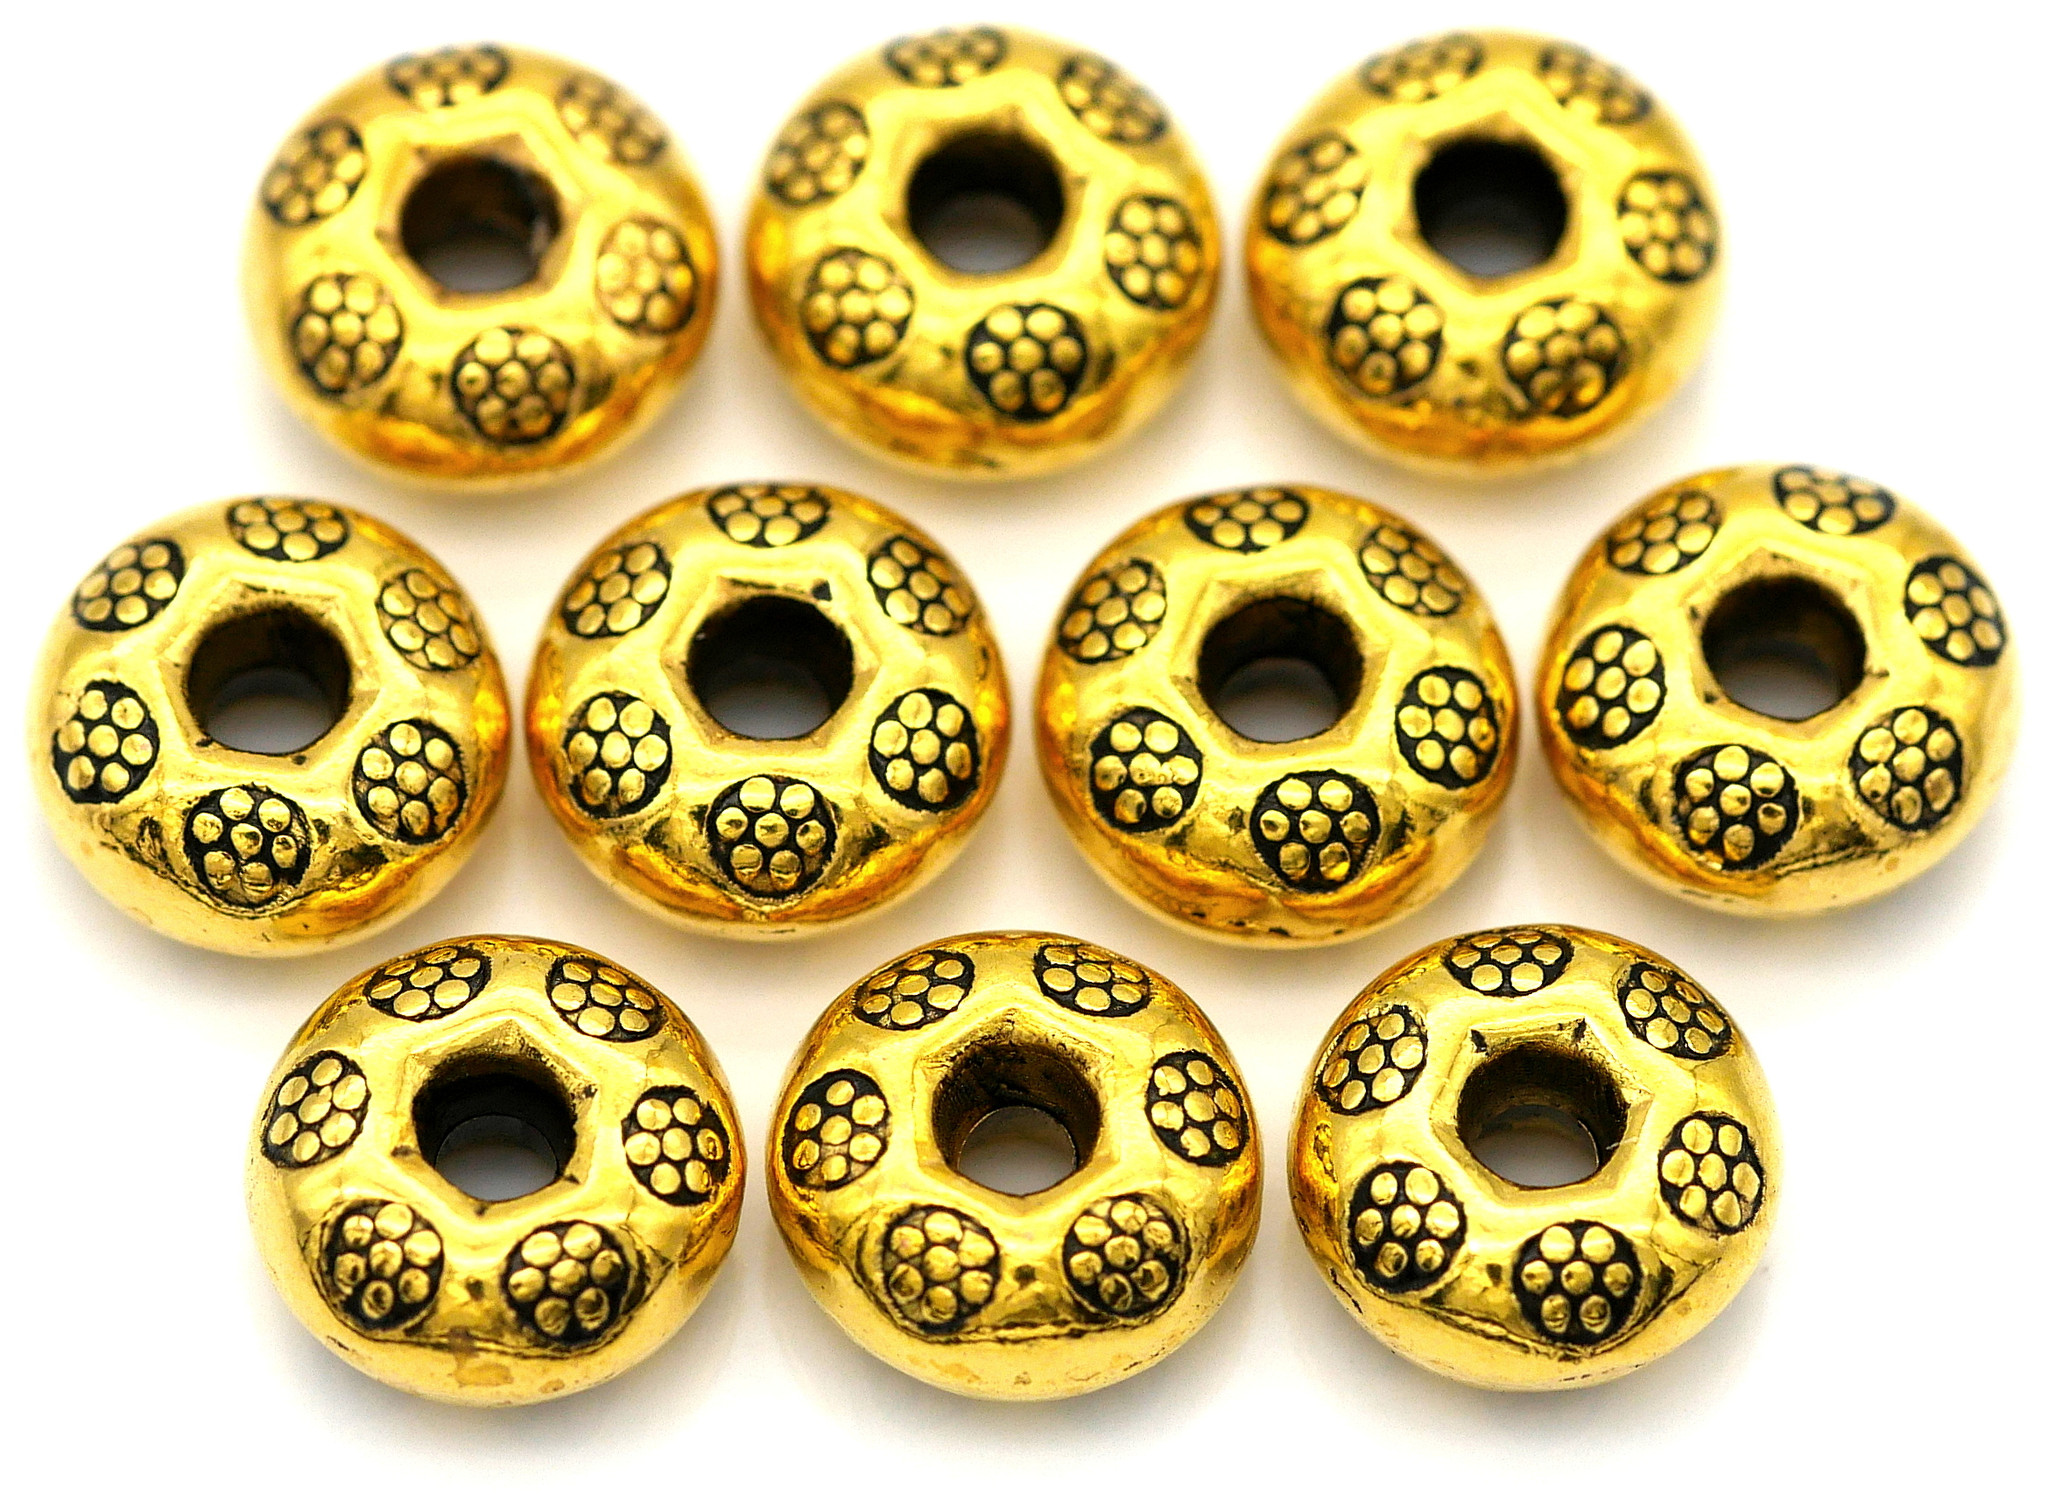 10pc 9.5x5mm Flower-Pattered Rondelle Spacer Beads, Antique Gold